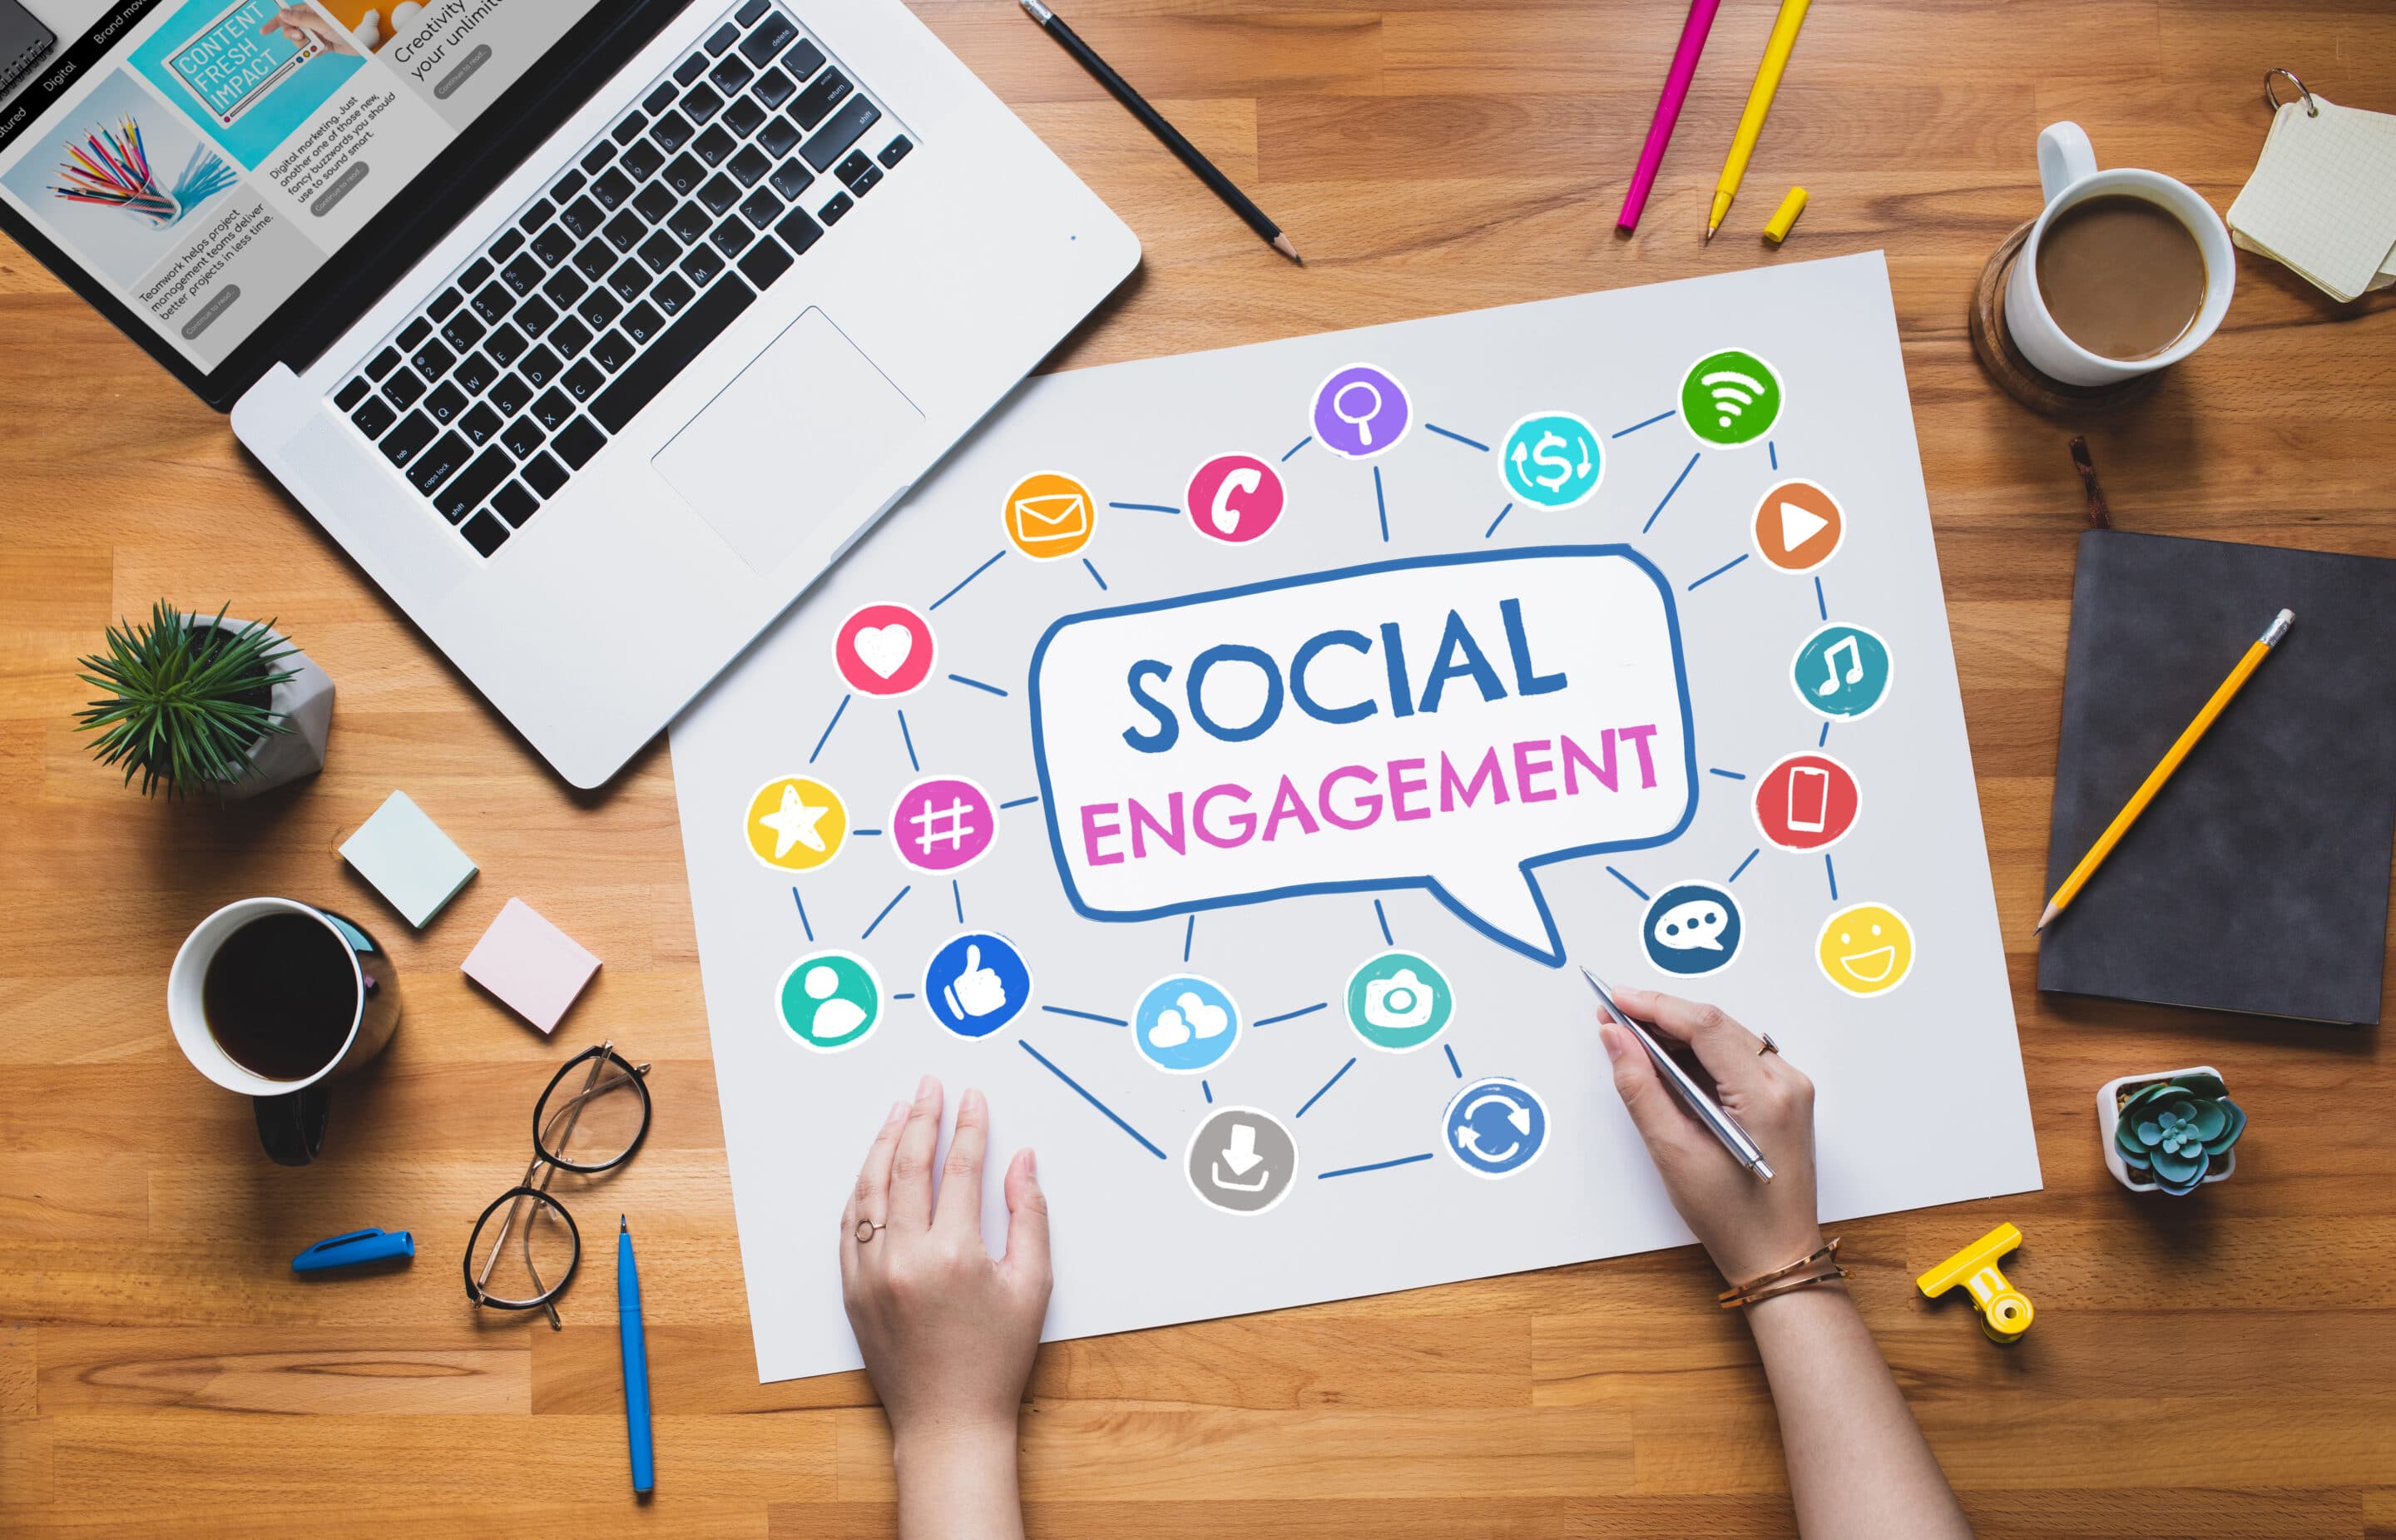 Easy-To-Follow Steps For Increasing Your Business's Social Media Engagement